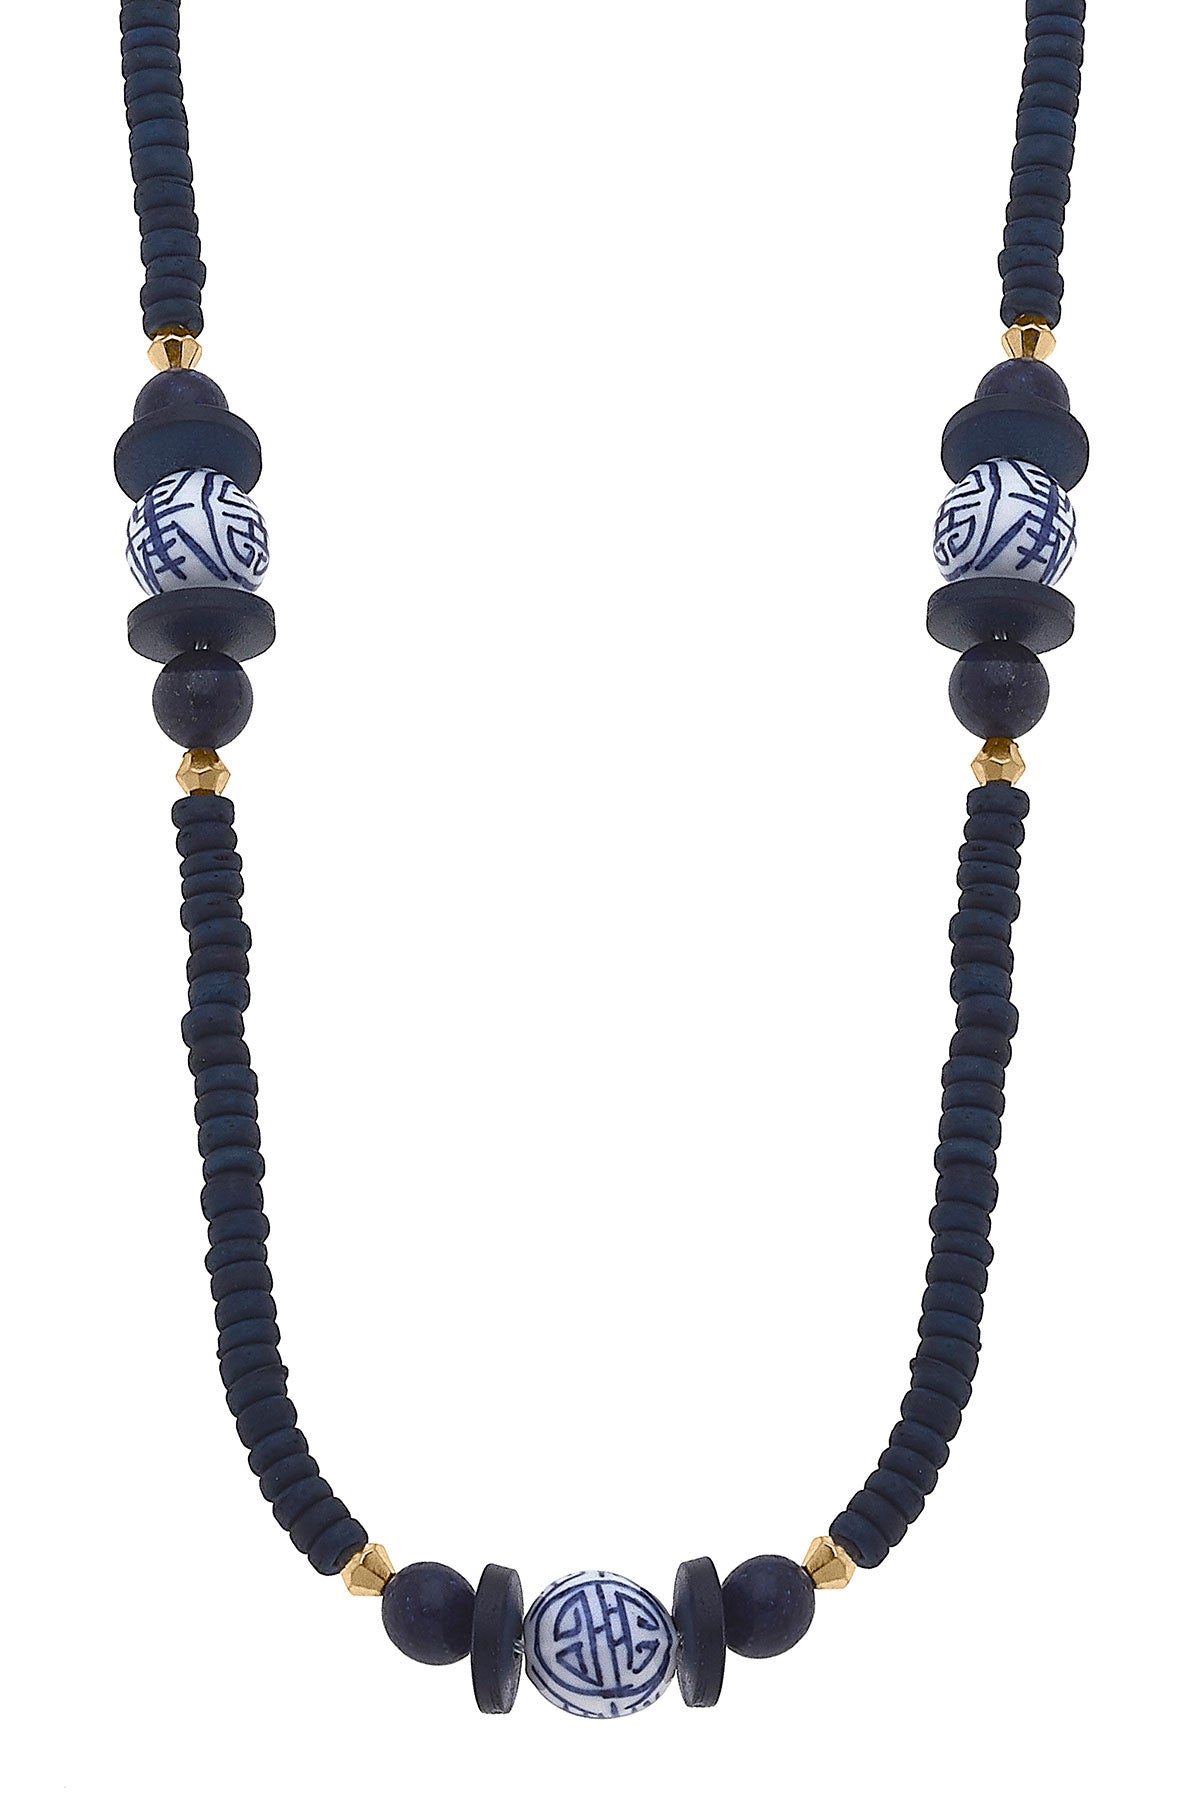 Savoy Blue & White Chinoiserie & Painted Wood Necklace in Navy